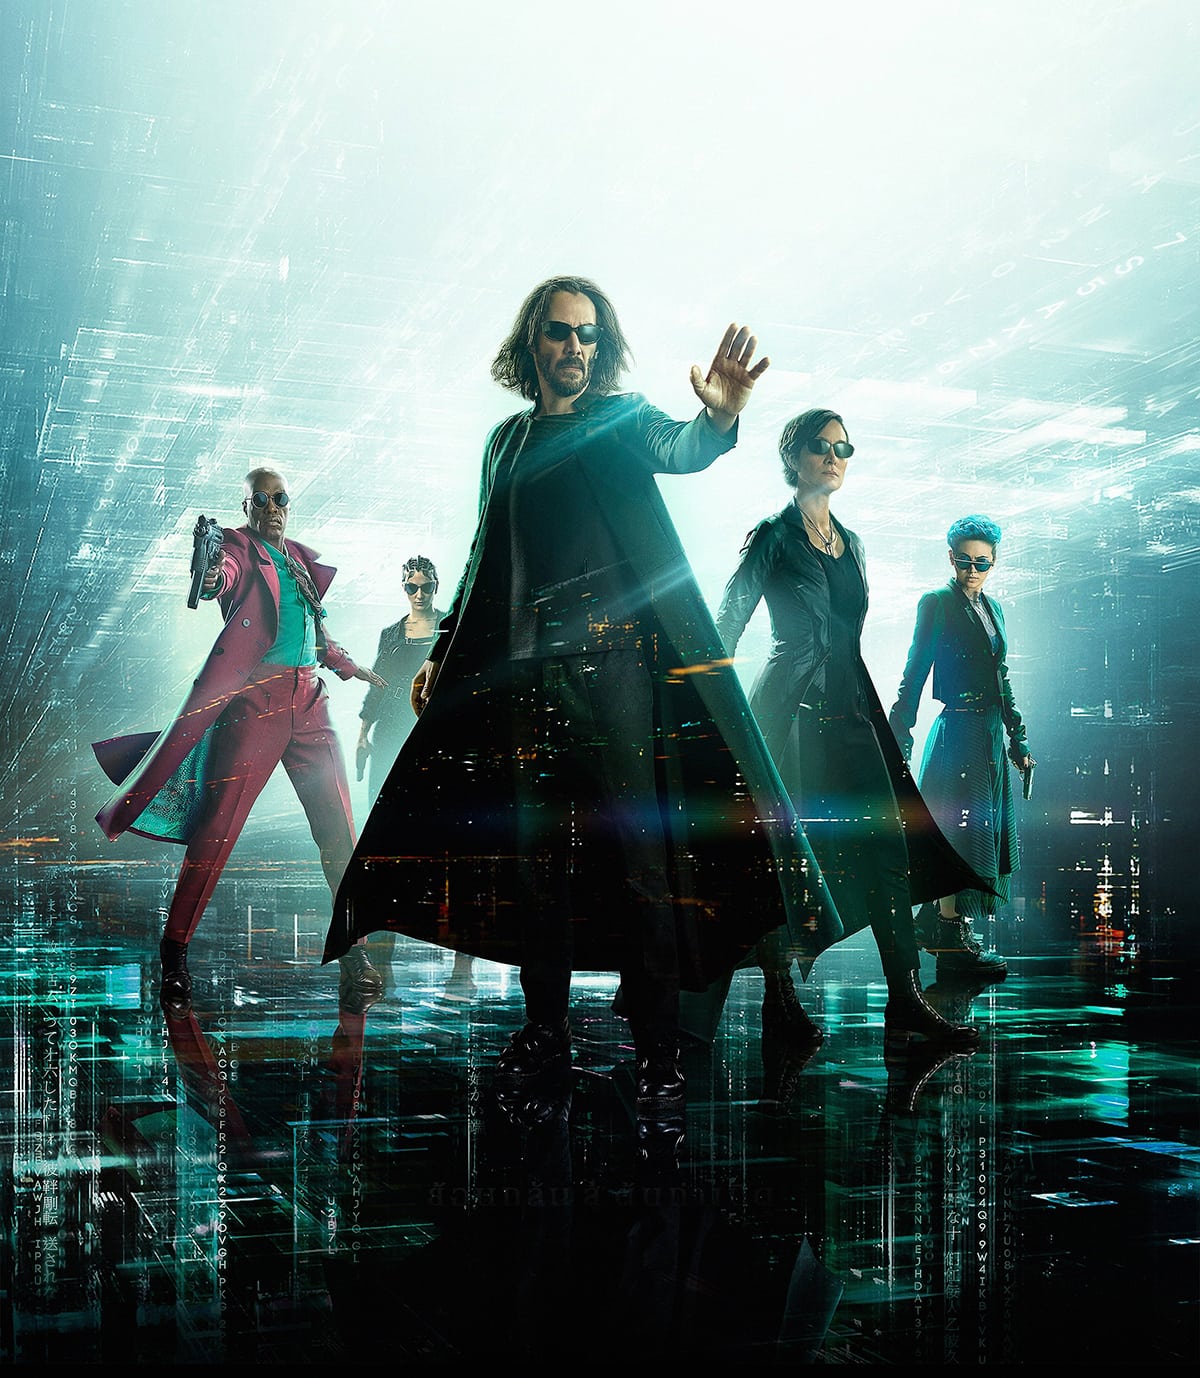 The fourth installment in The Matrix film franchise, The Matrix Resurrections, is set sixty years after The Matrix Revolutions